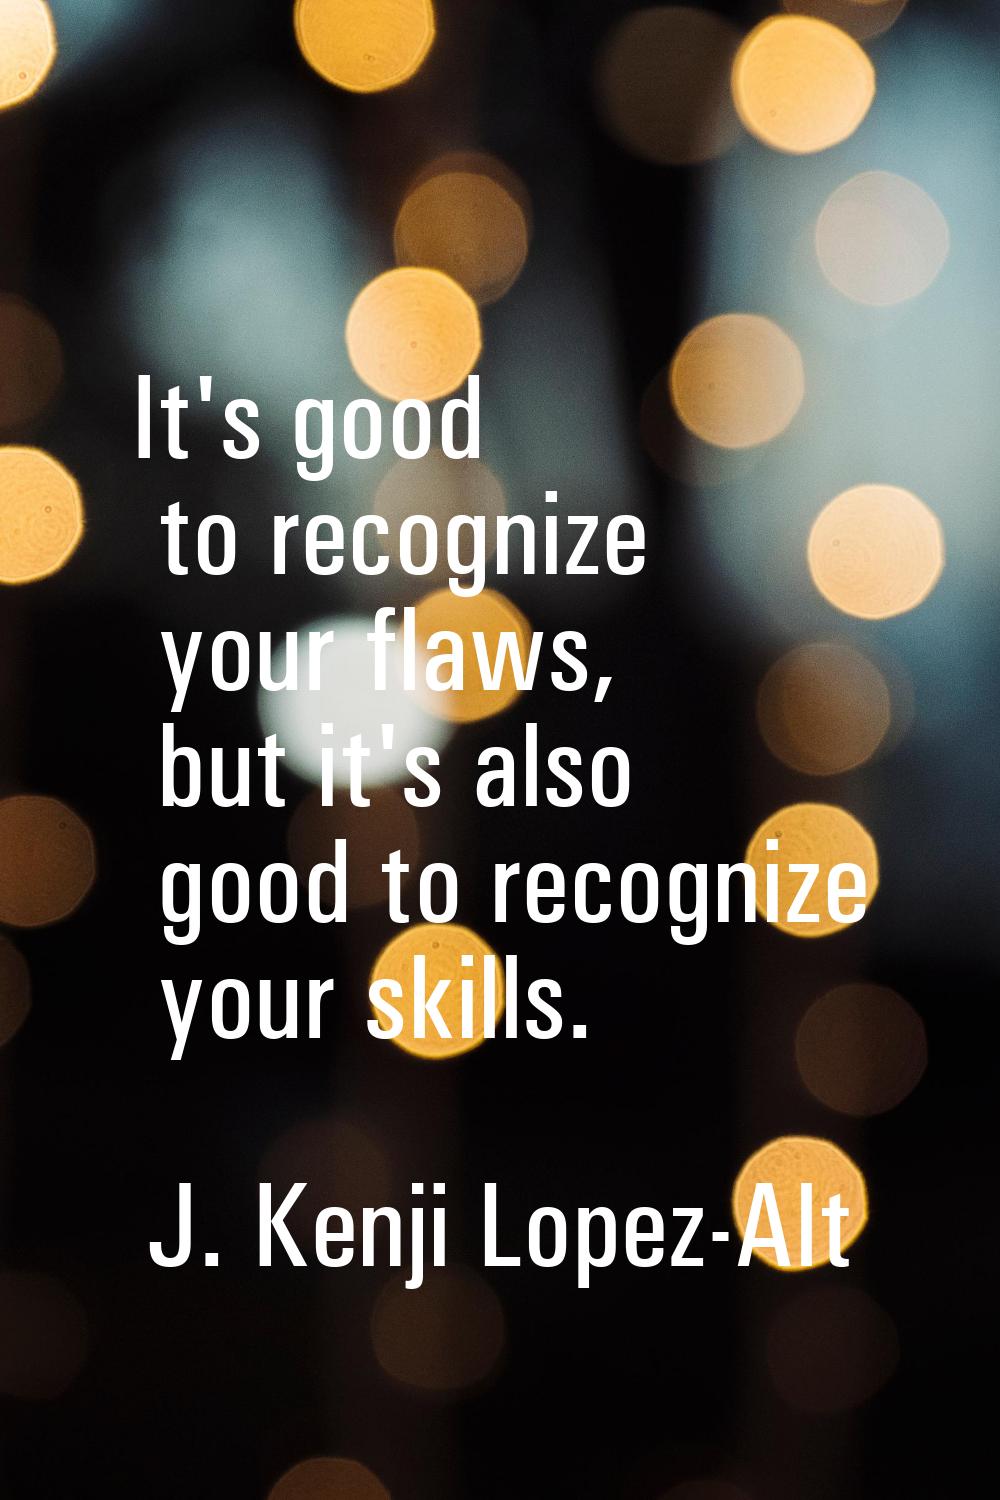 It's good to recognize your flaws, but it's also good to recognize your skills.